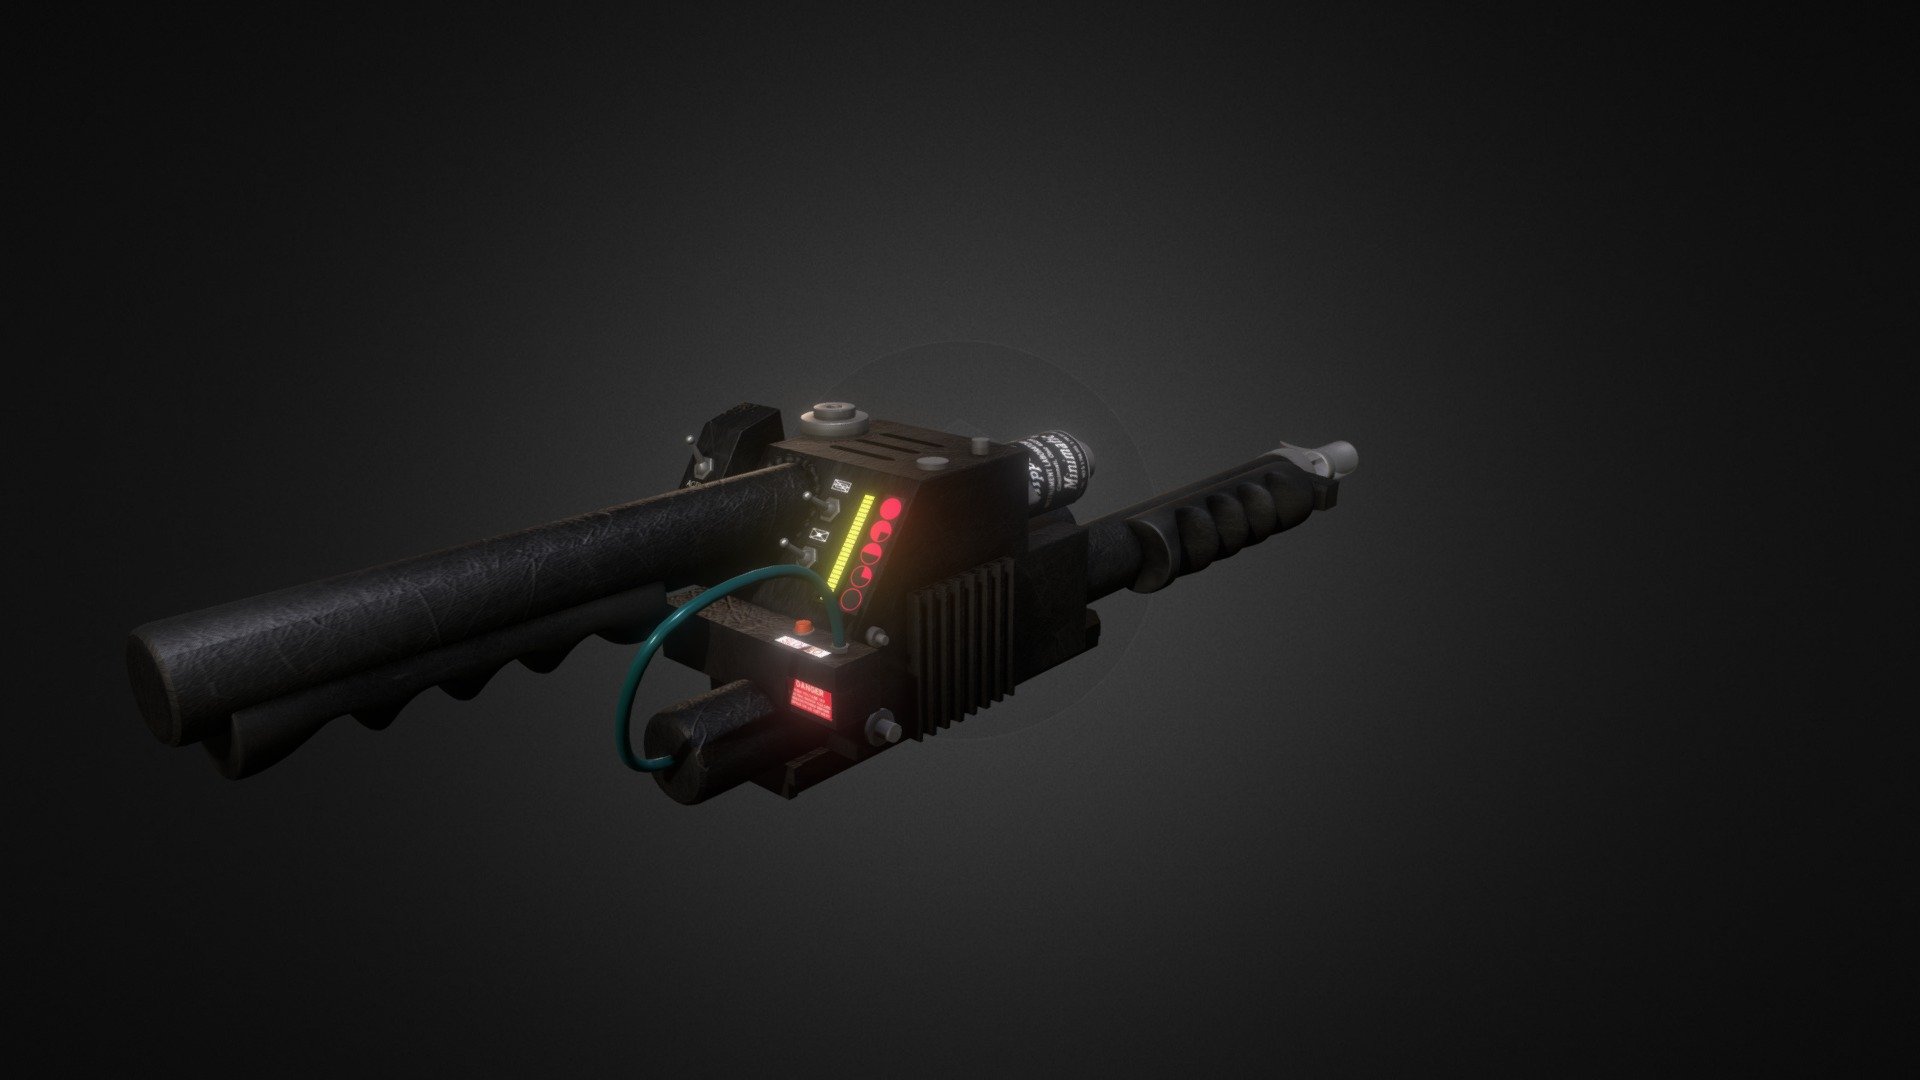 The infamous Particle thrower AKA Neutrino Wand from Ghostbusters. Modelled in 3DS Max. Check out my Proton Pack here too https://sketchfab.com/models/e441a7e6e9c54789a27eea995ba73b49  :) - Ghostbusters Particle Thrower - 3D model by paulelderdesign 3d model